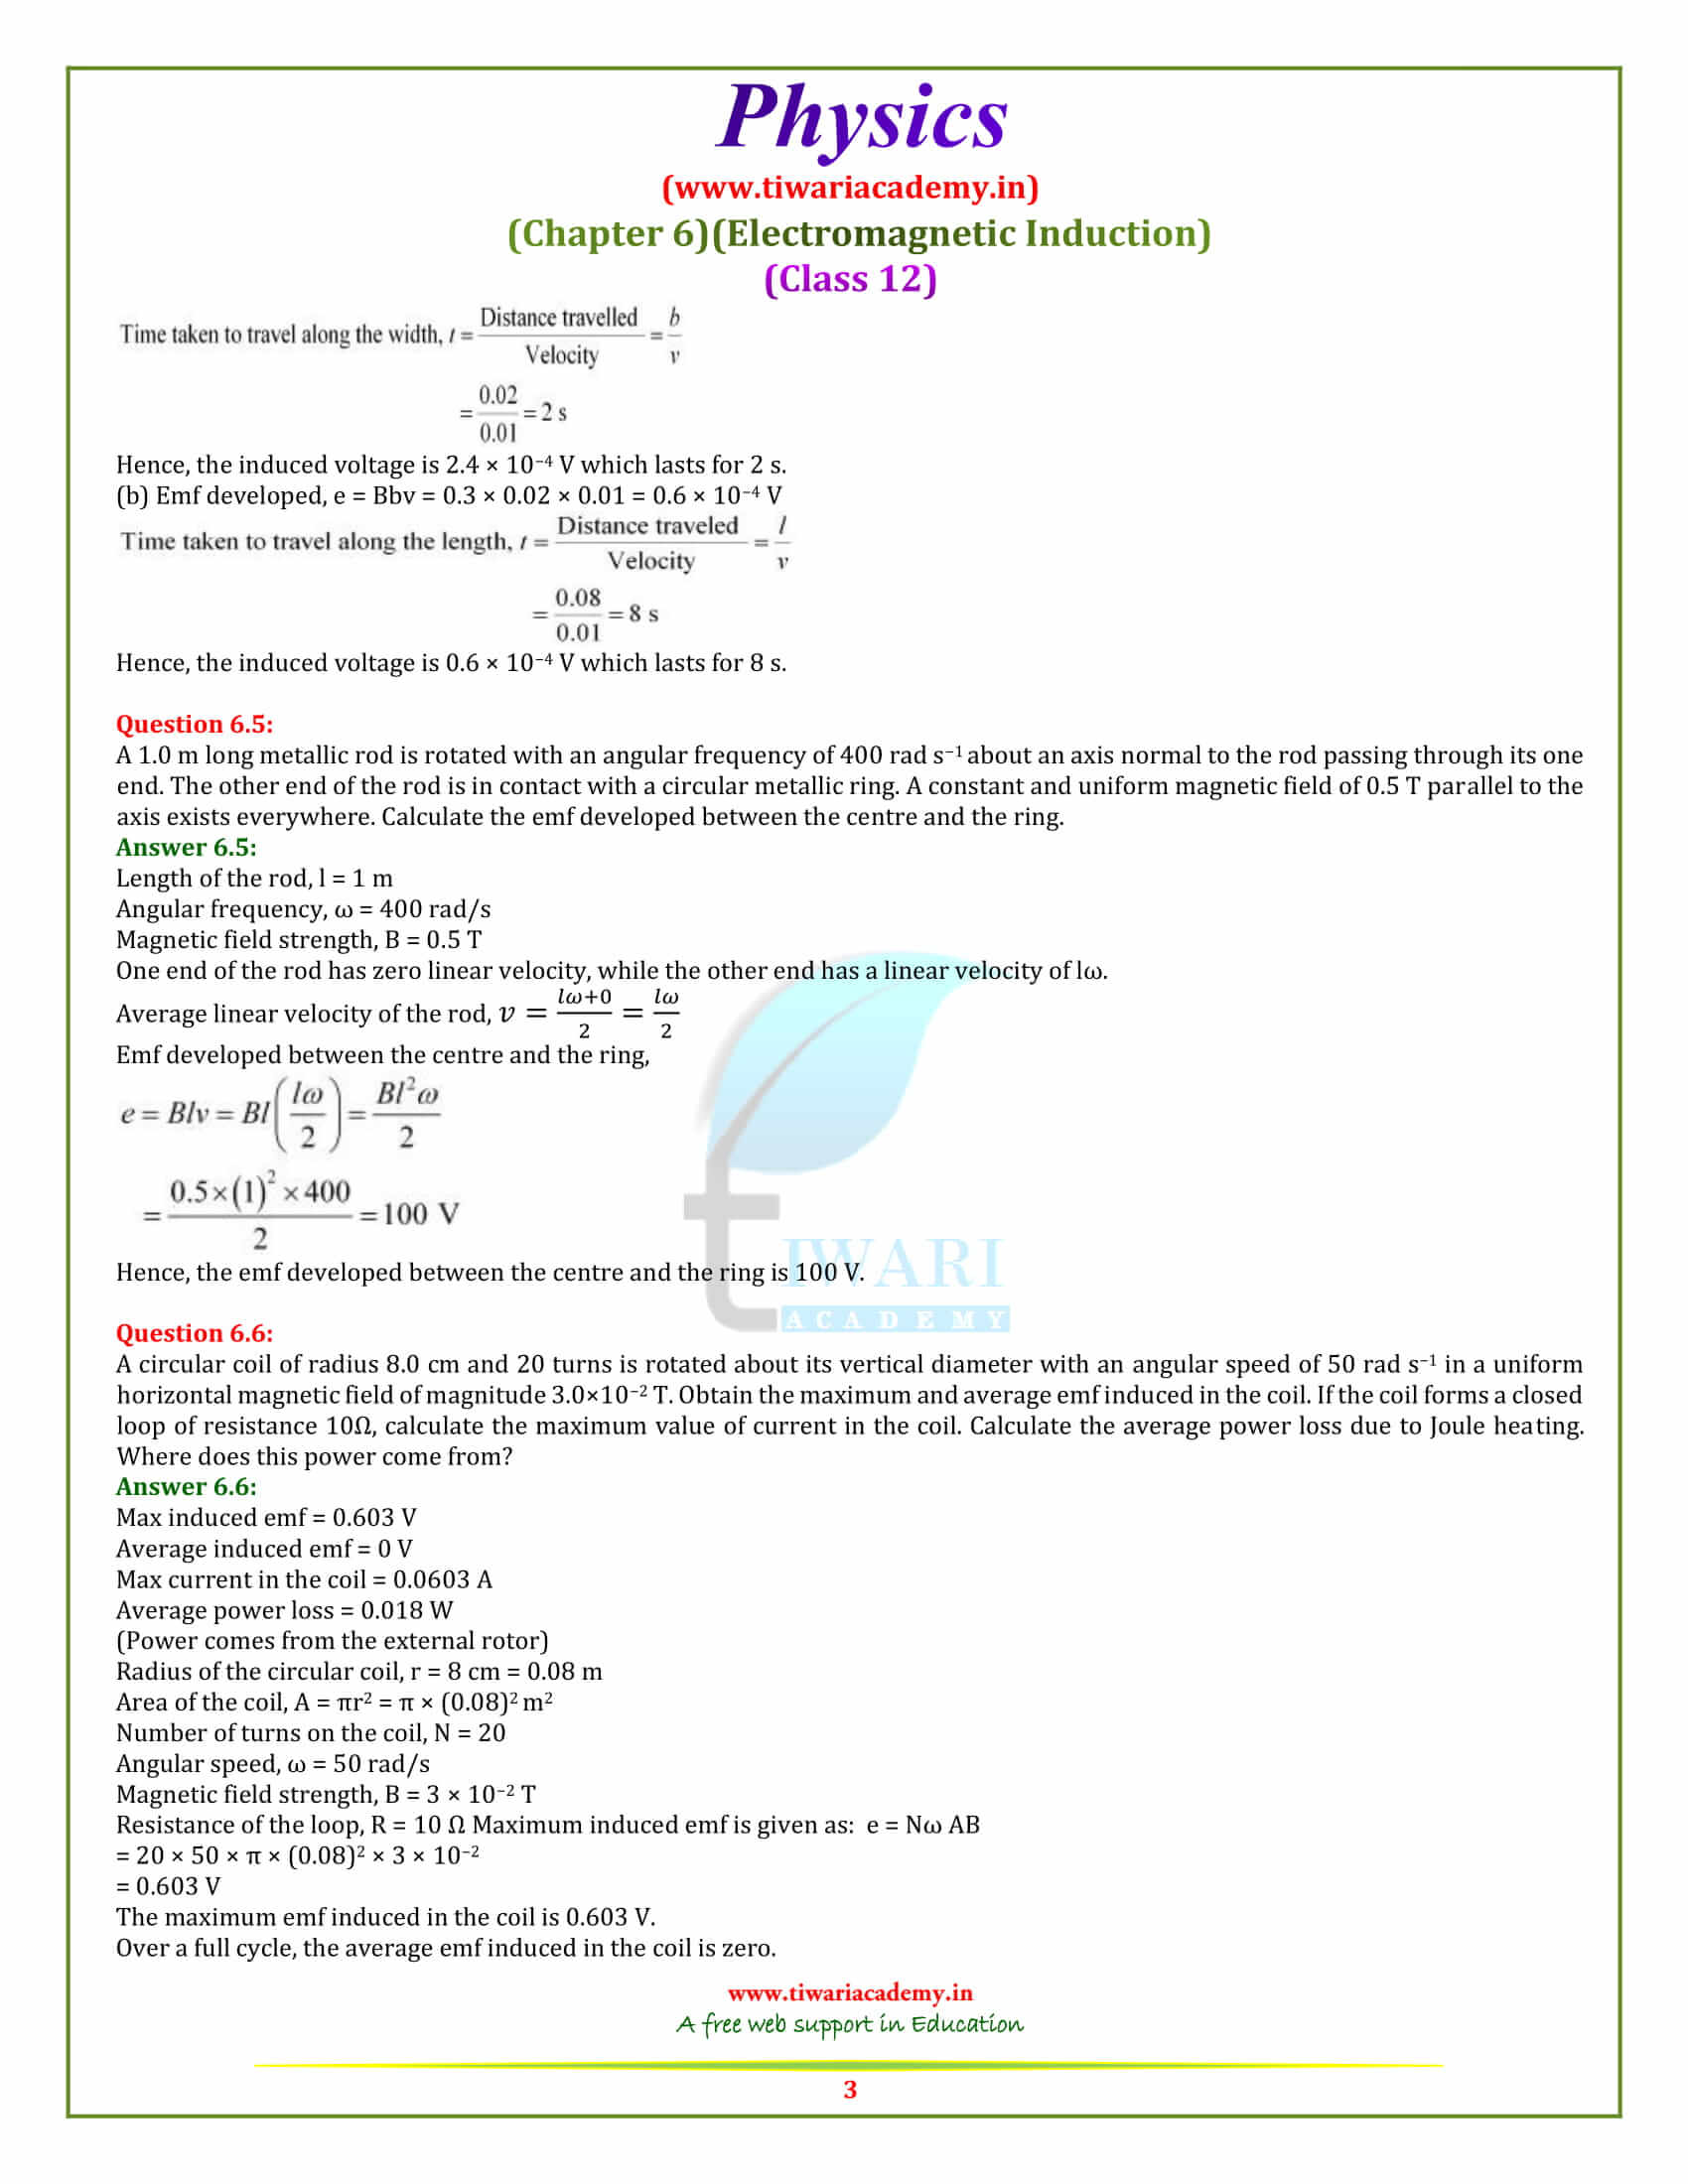 NCERT Solutions for Class 12 Physics Chapter 6 Electromagnetic Induction download free